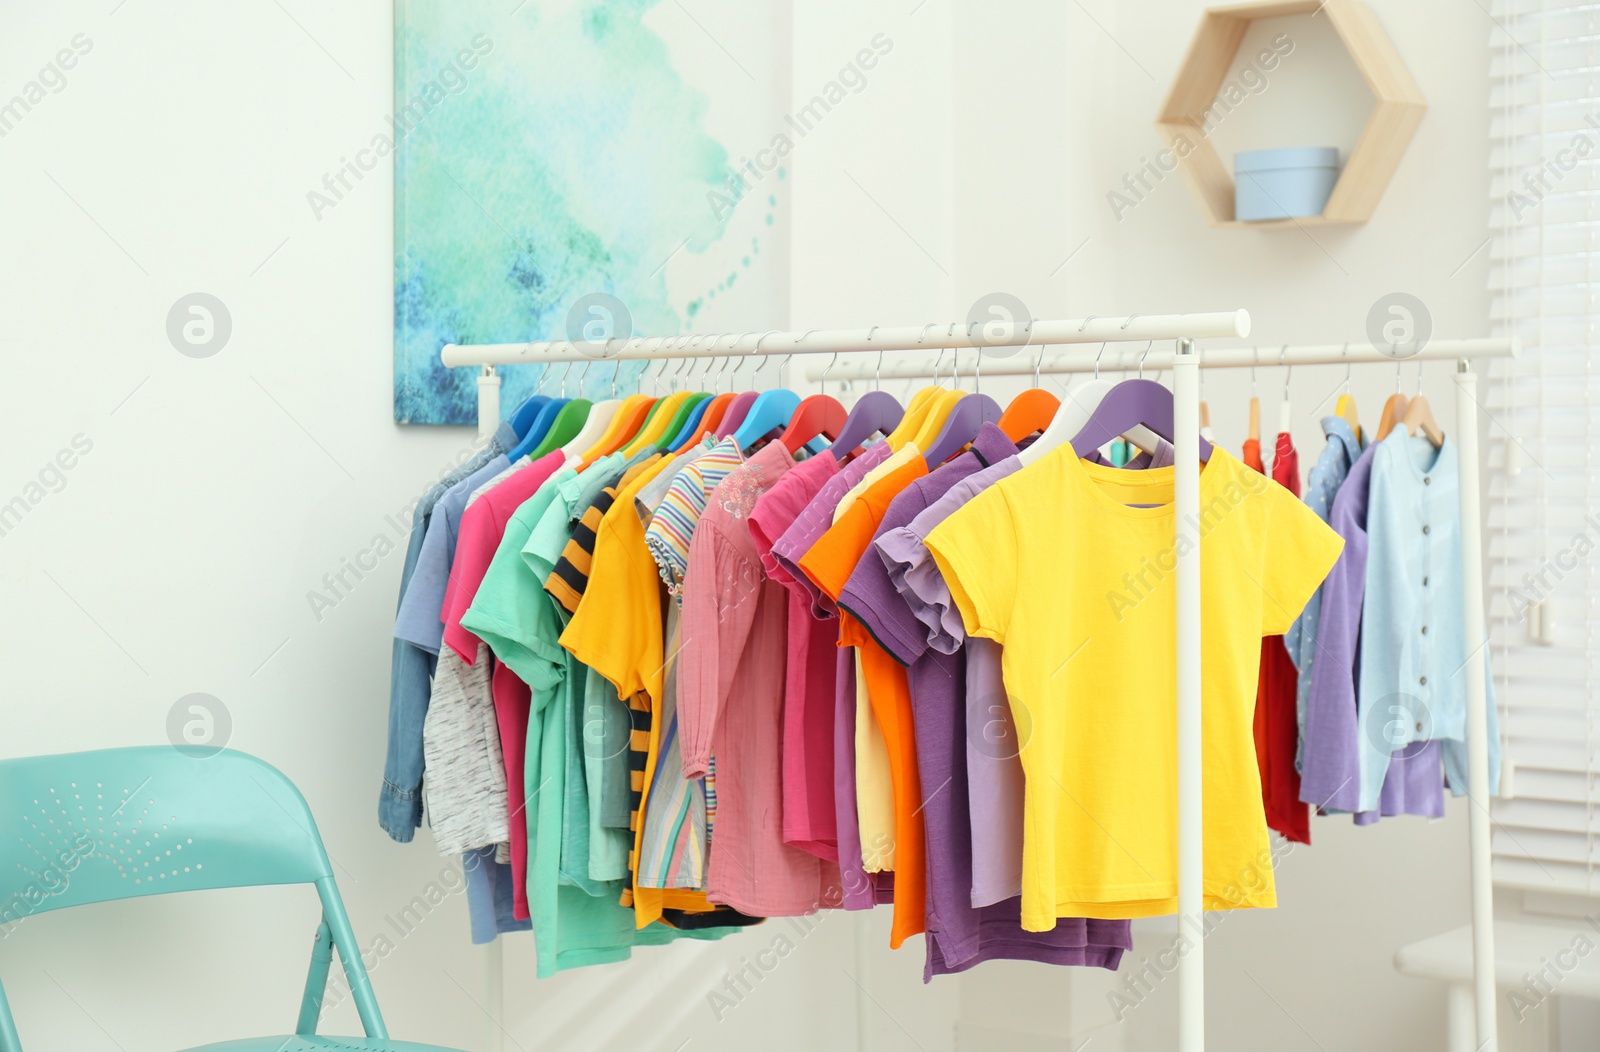 Photo of Different child's clothes hanging on racks in room